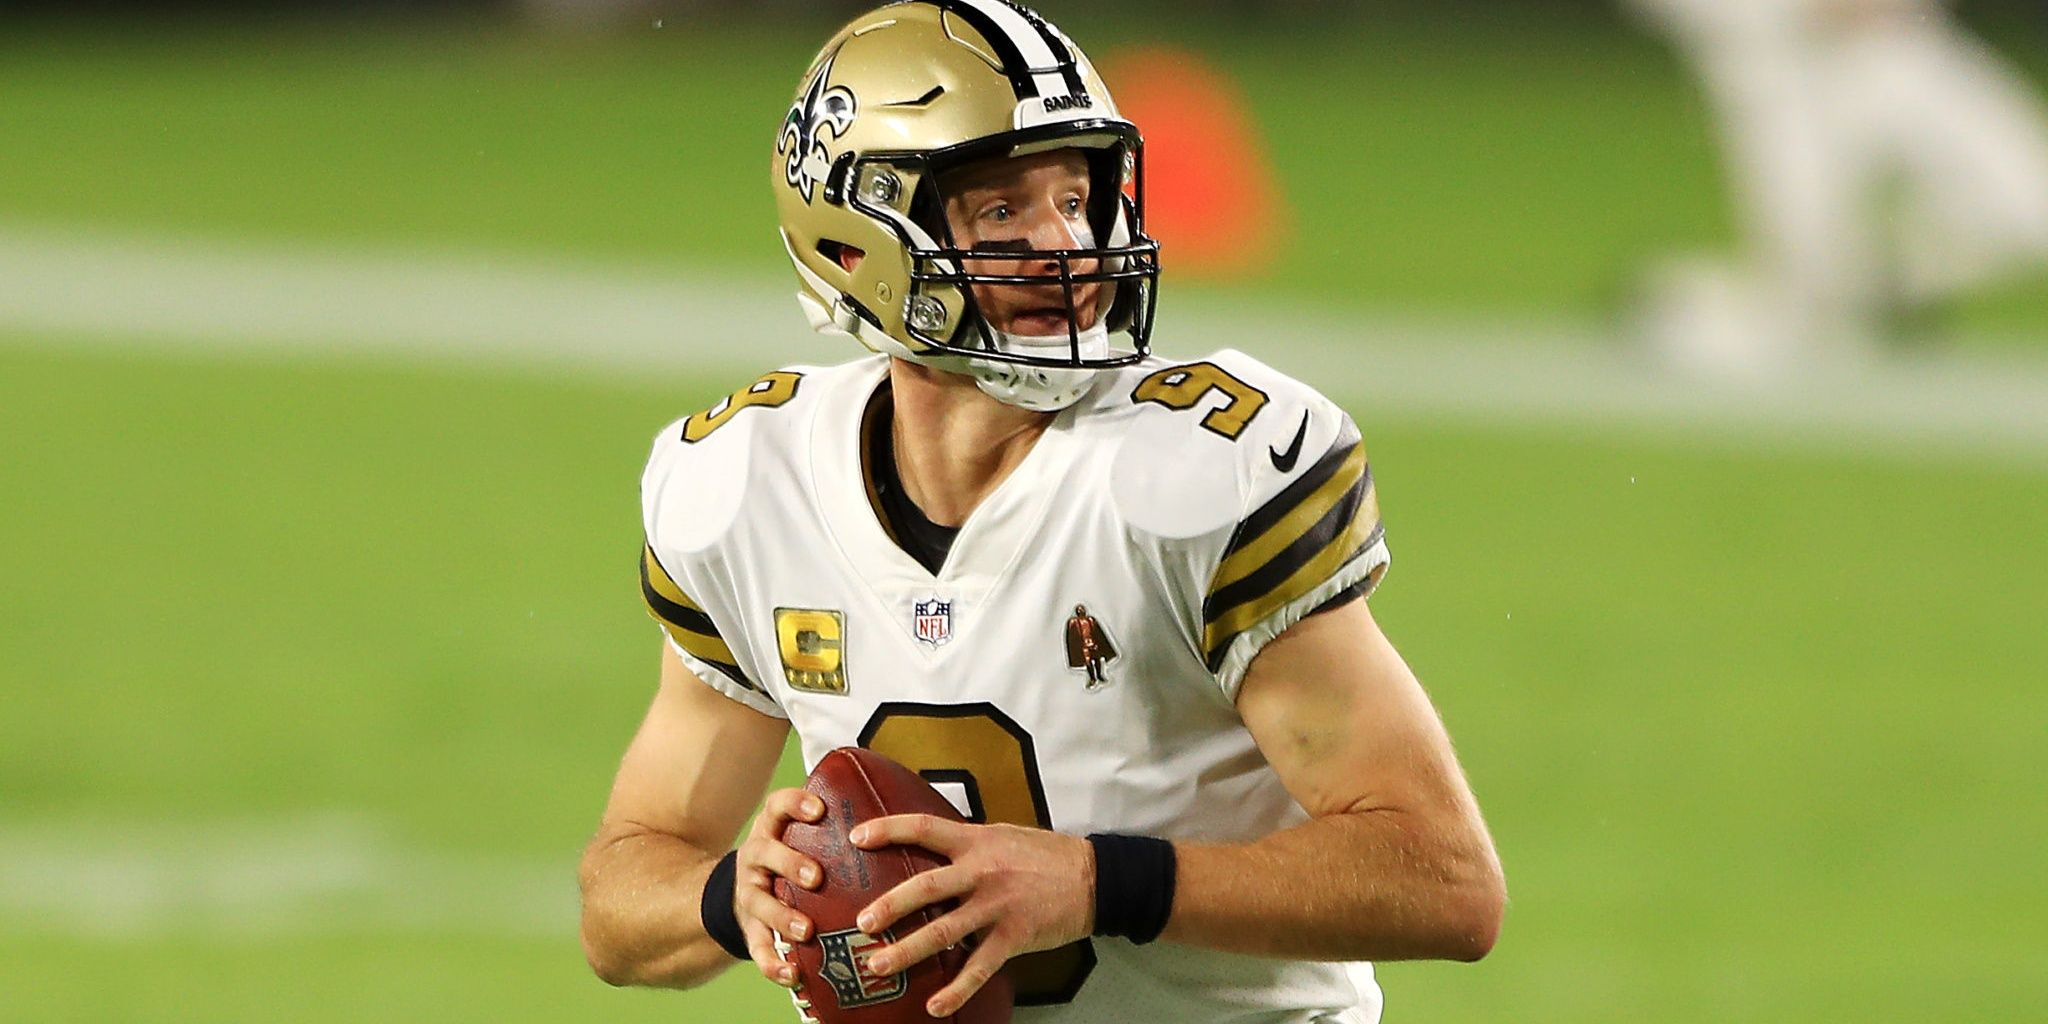 Drew Brees playing for the Saints 